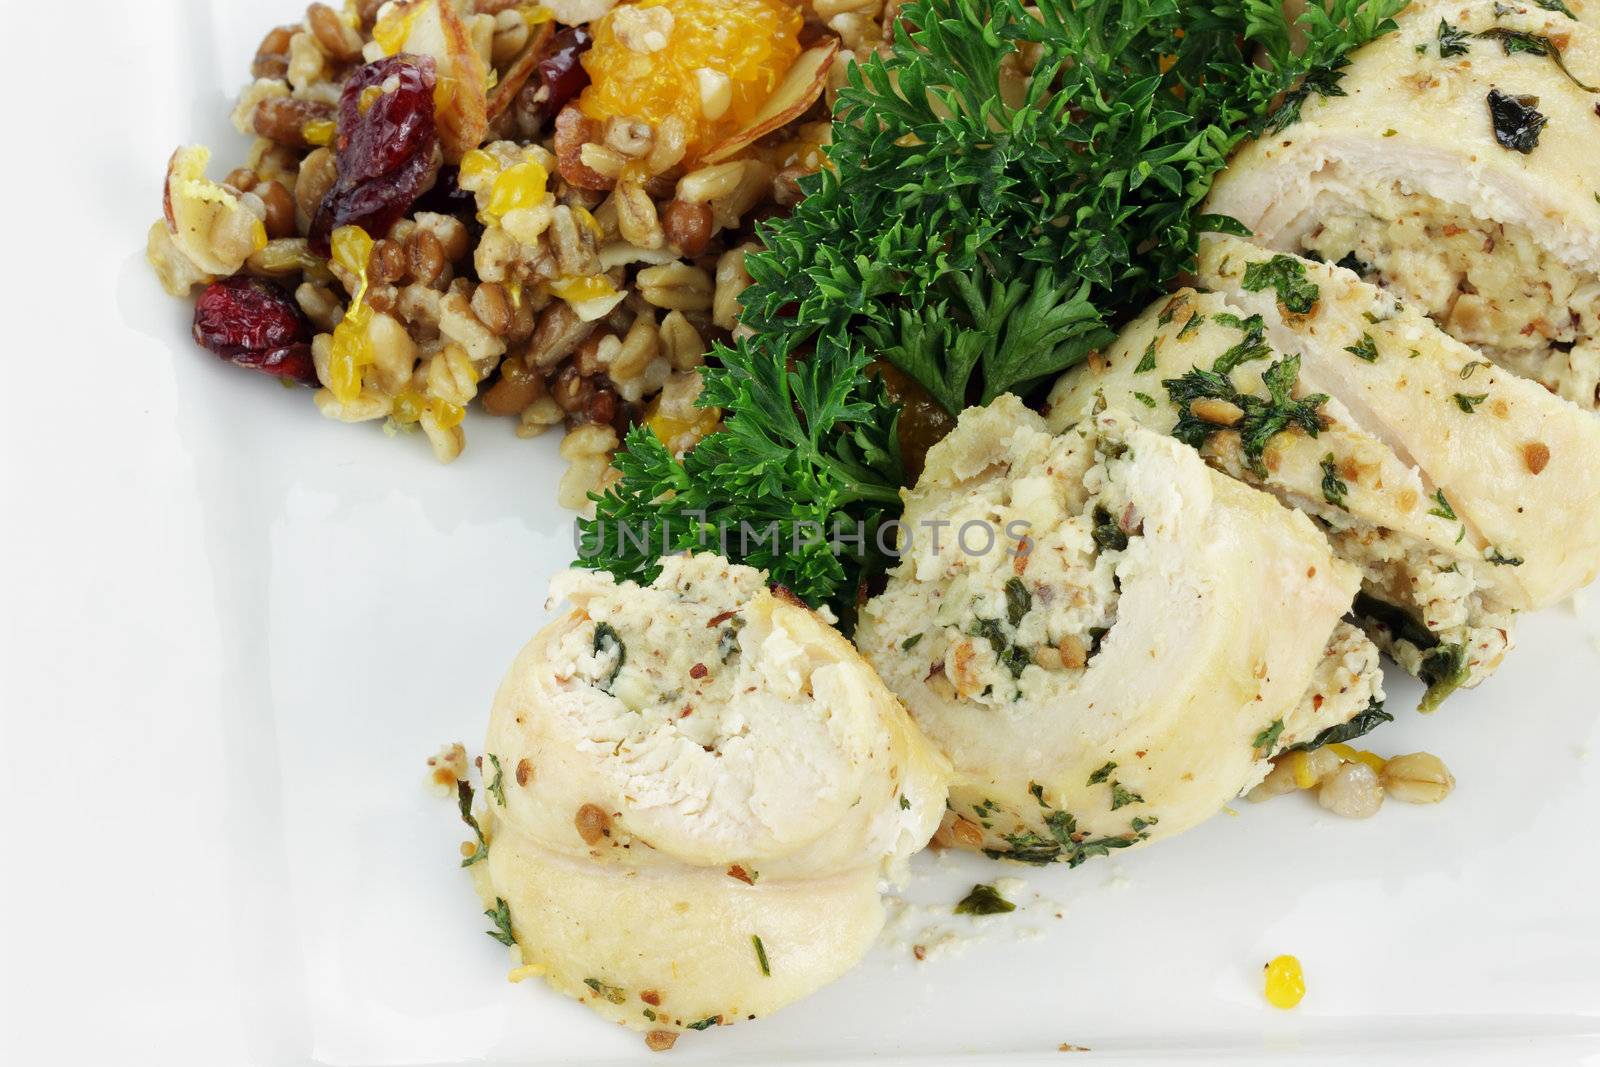 Chicken Roulade stuffed with spinach and almond paste served with pilaf with whole grains, nuts, and dried fruit.